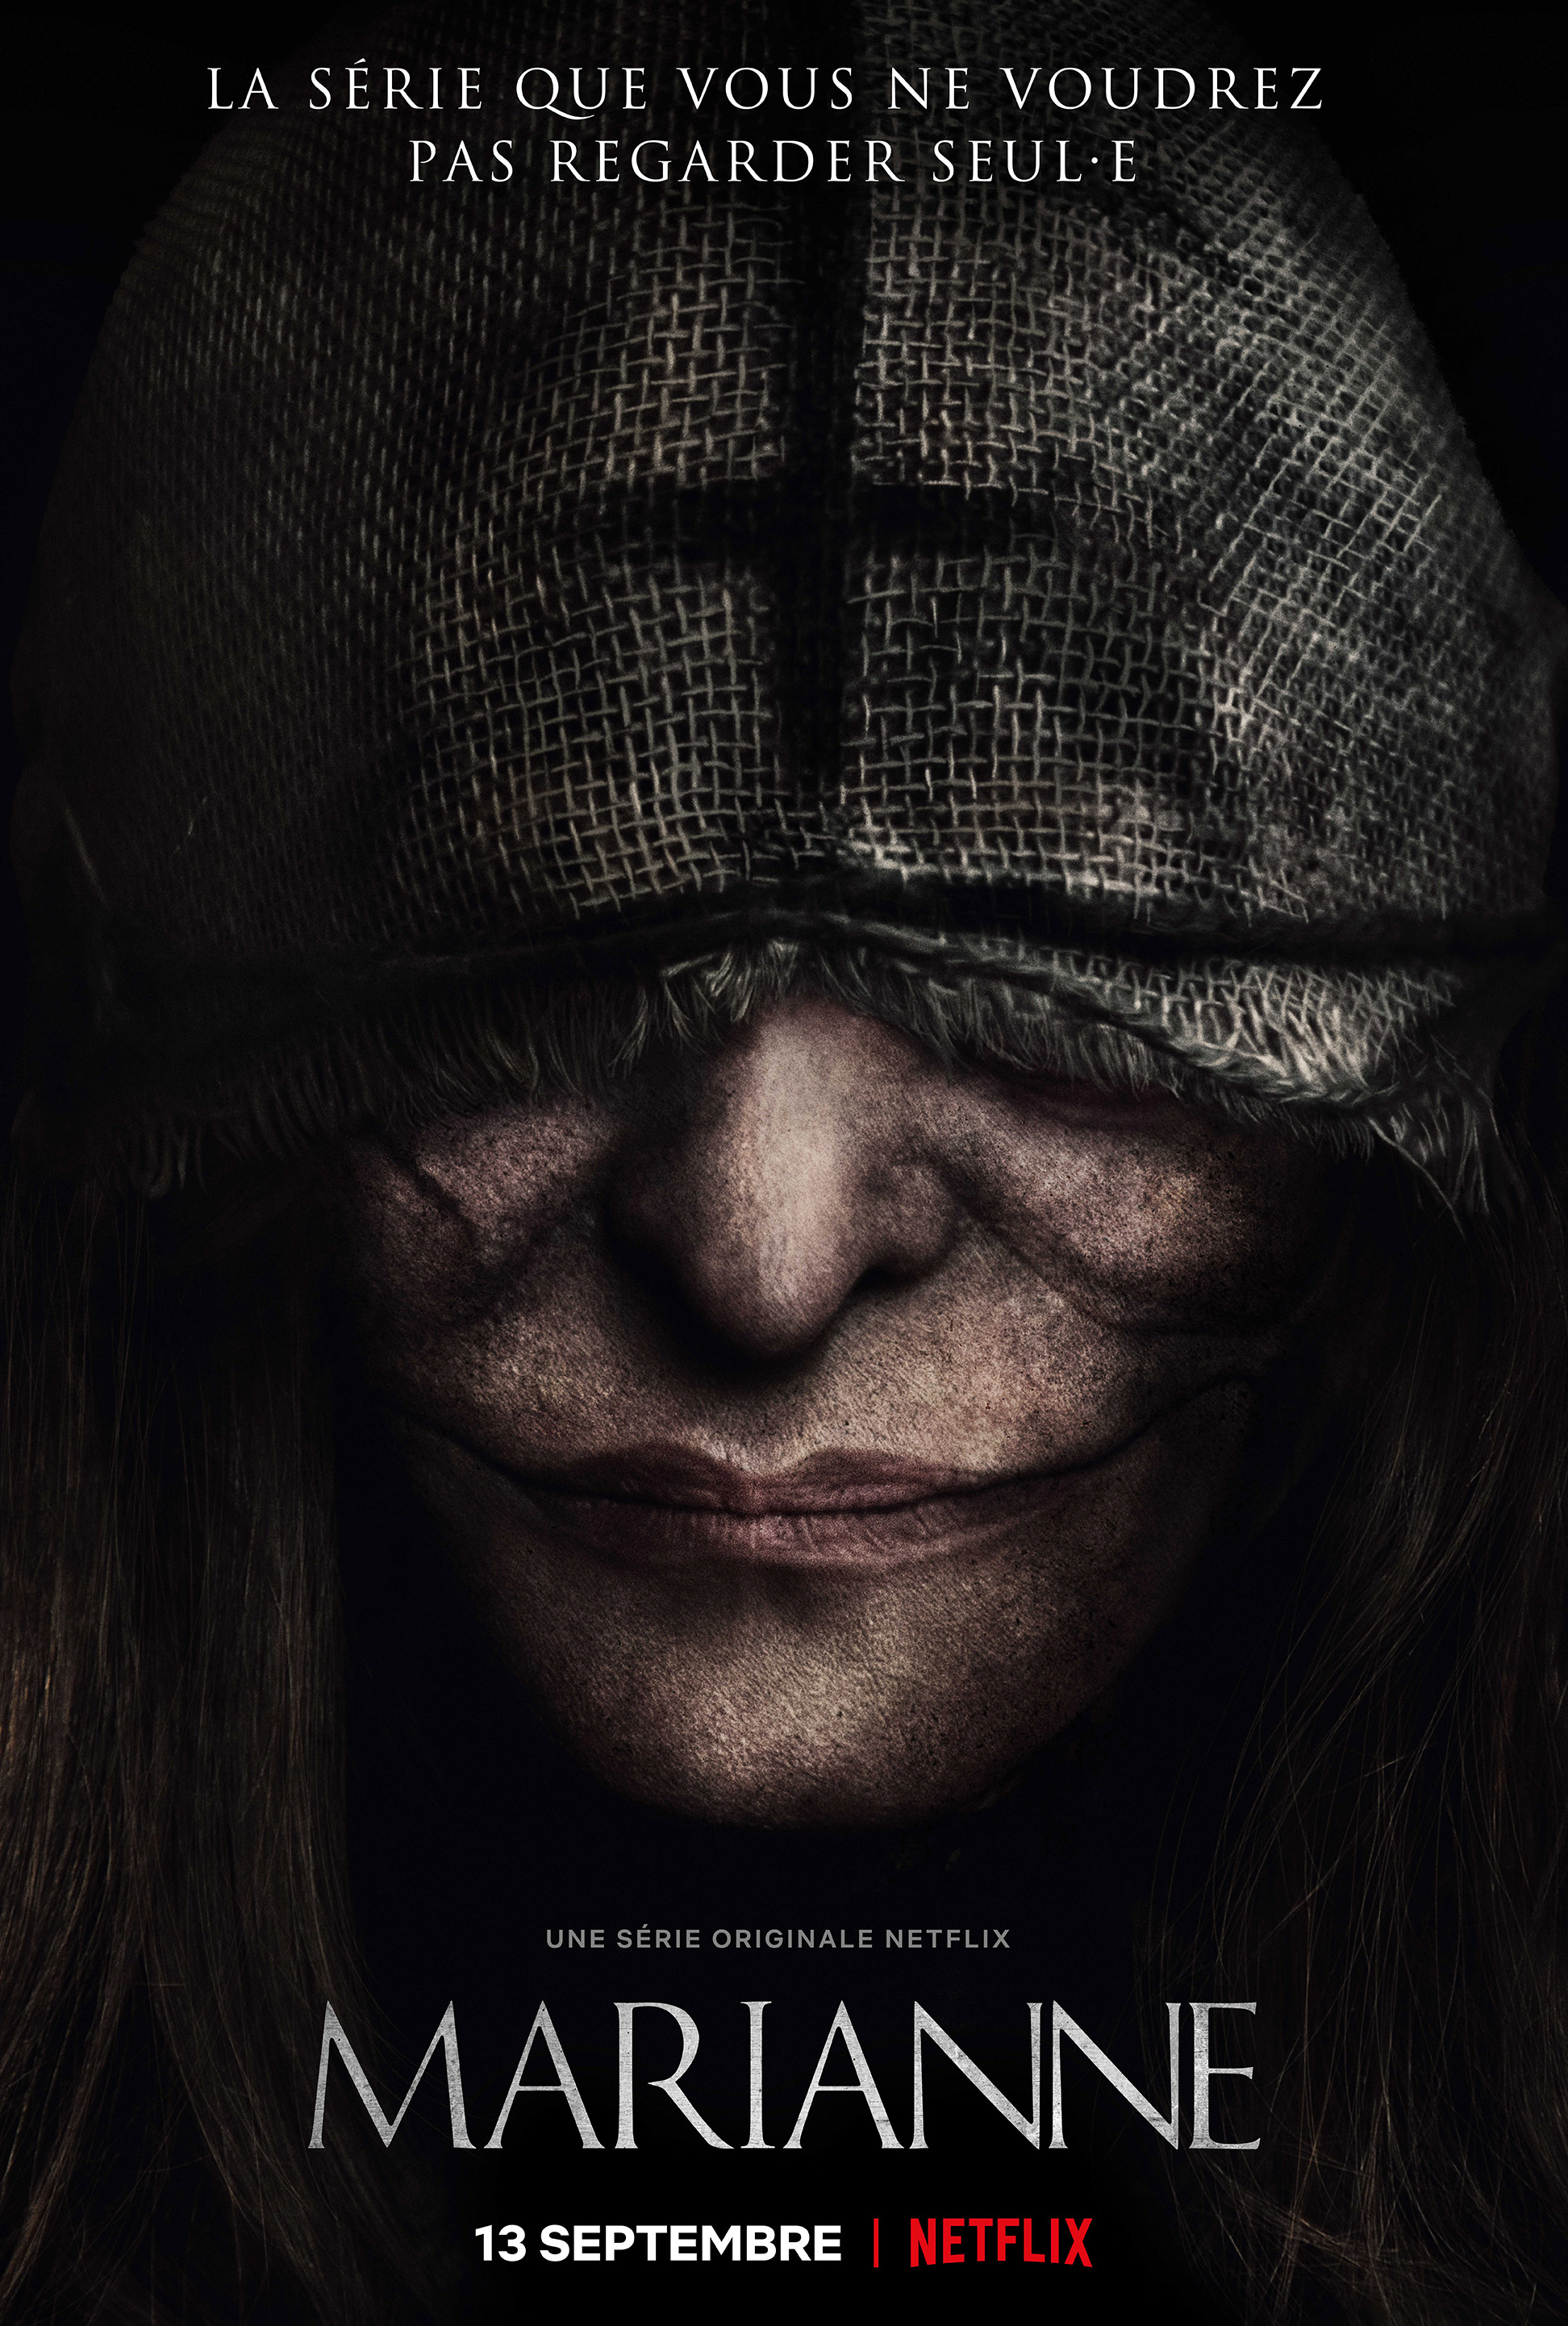 Marianne (Serie) - Film 2019 - Scary-Movies.de